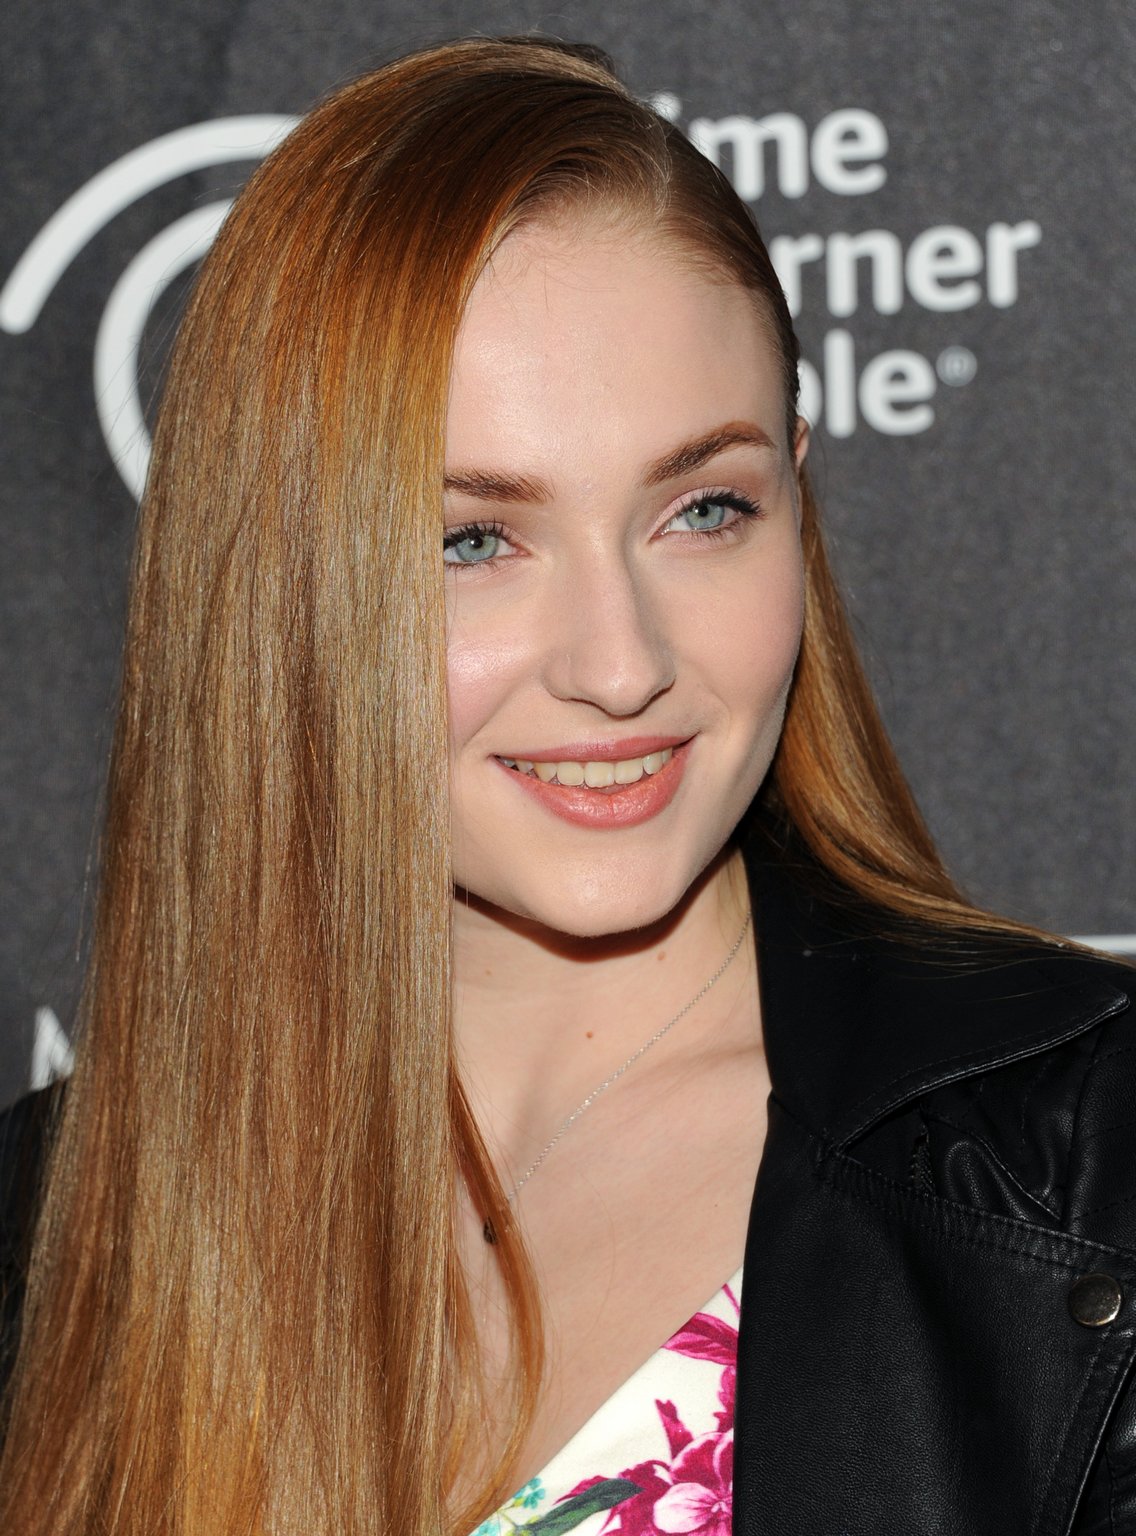 nyc-exhibition-sophie-turner-game-of-thrones-photo-34159059-fanpop